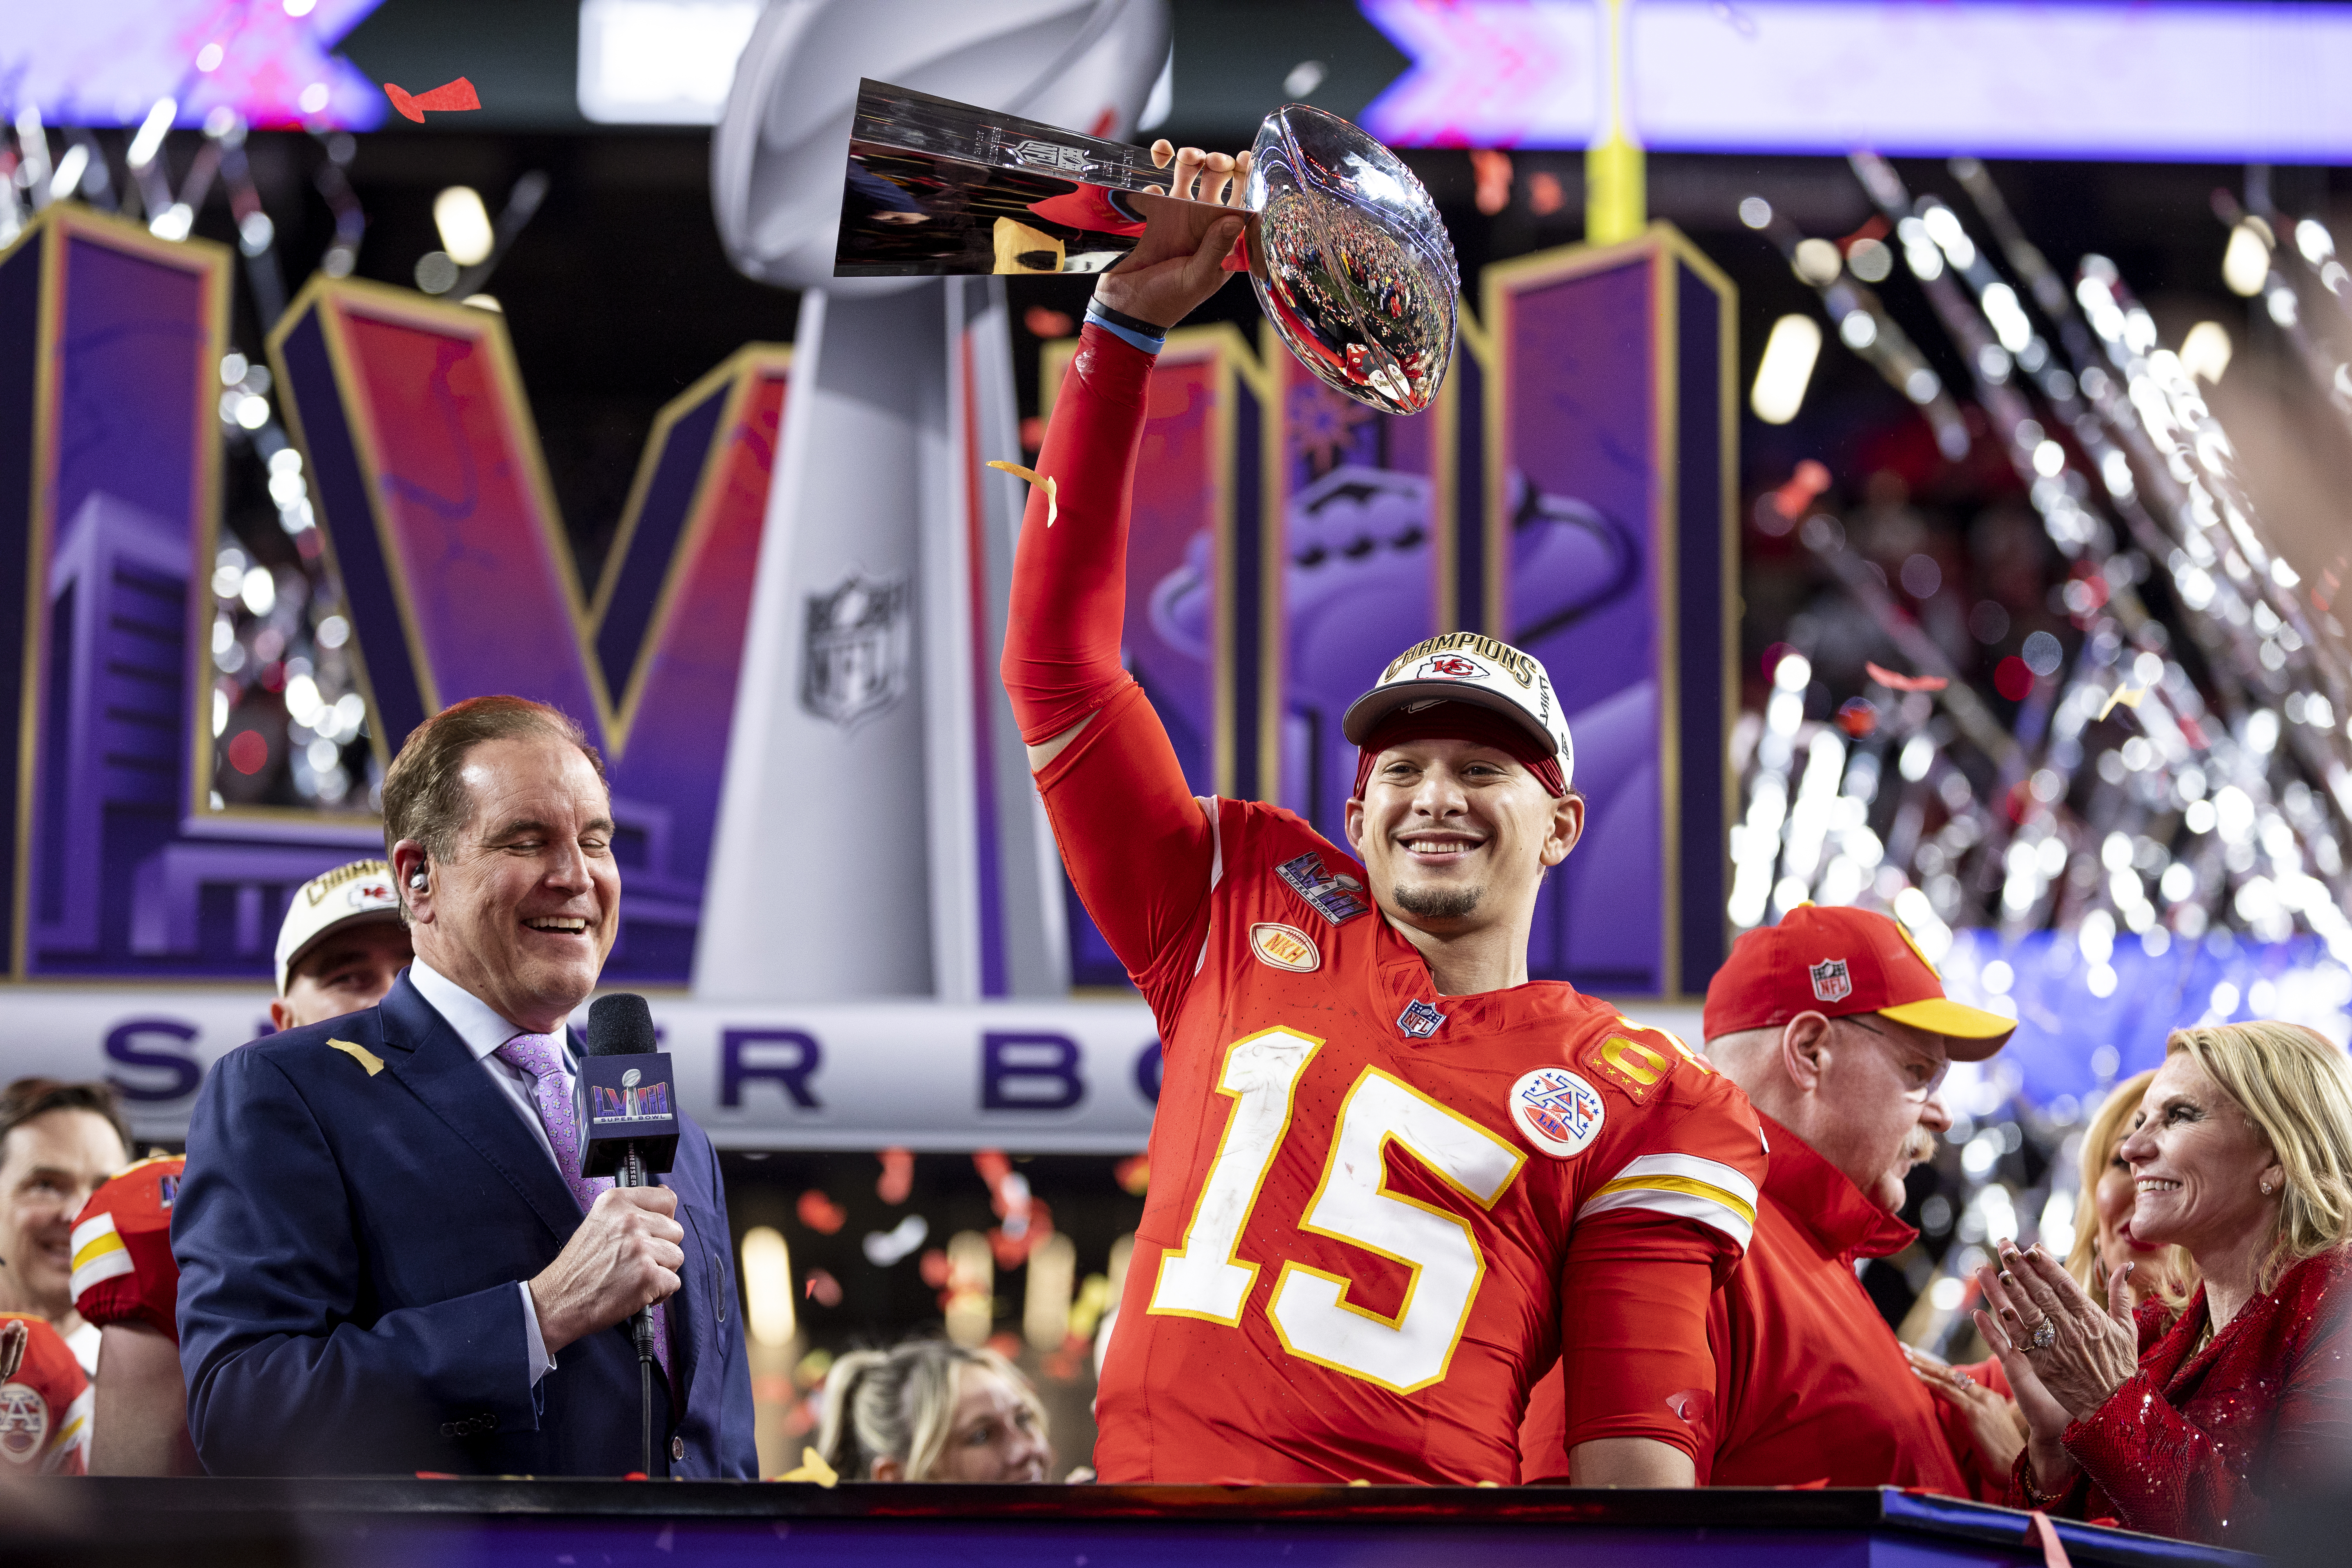 Patrick Mahomes won his third Super Bowl title in February